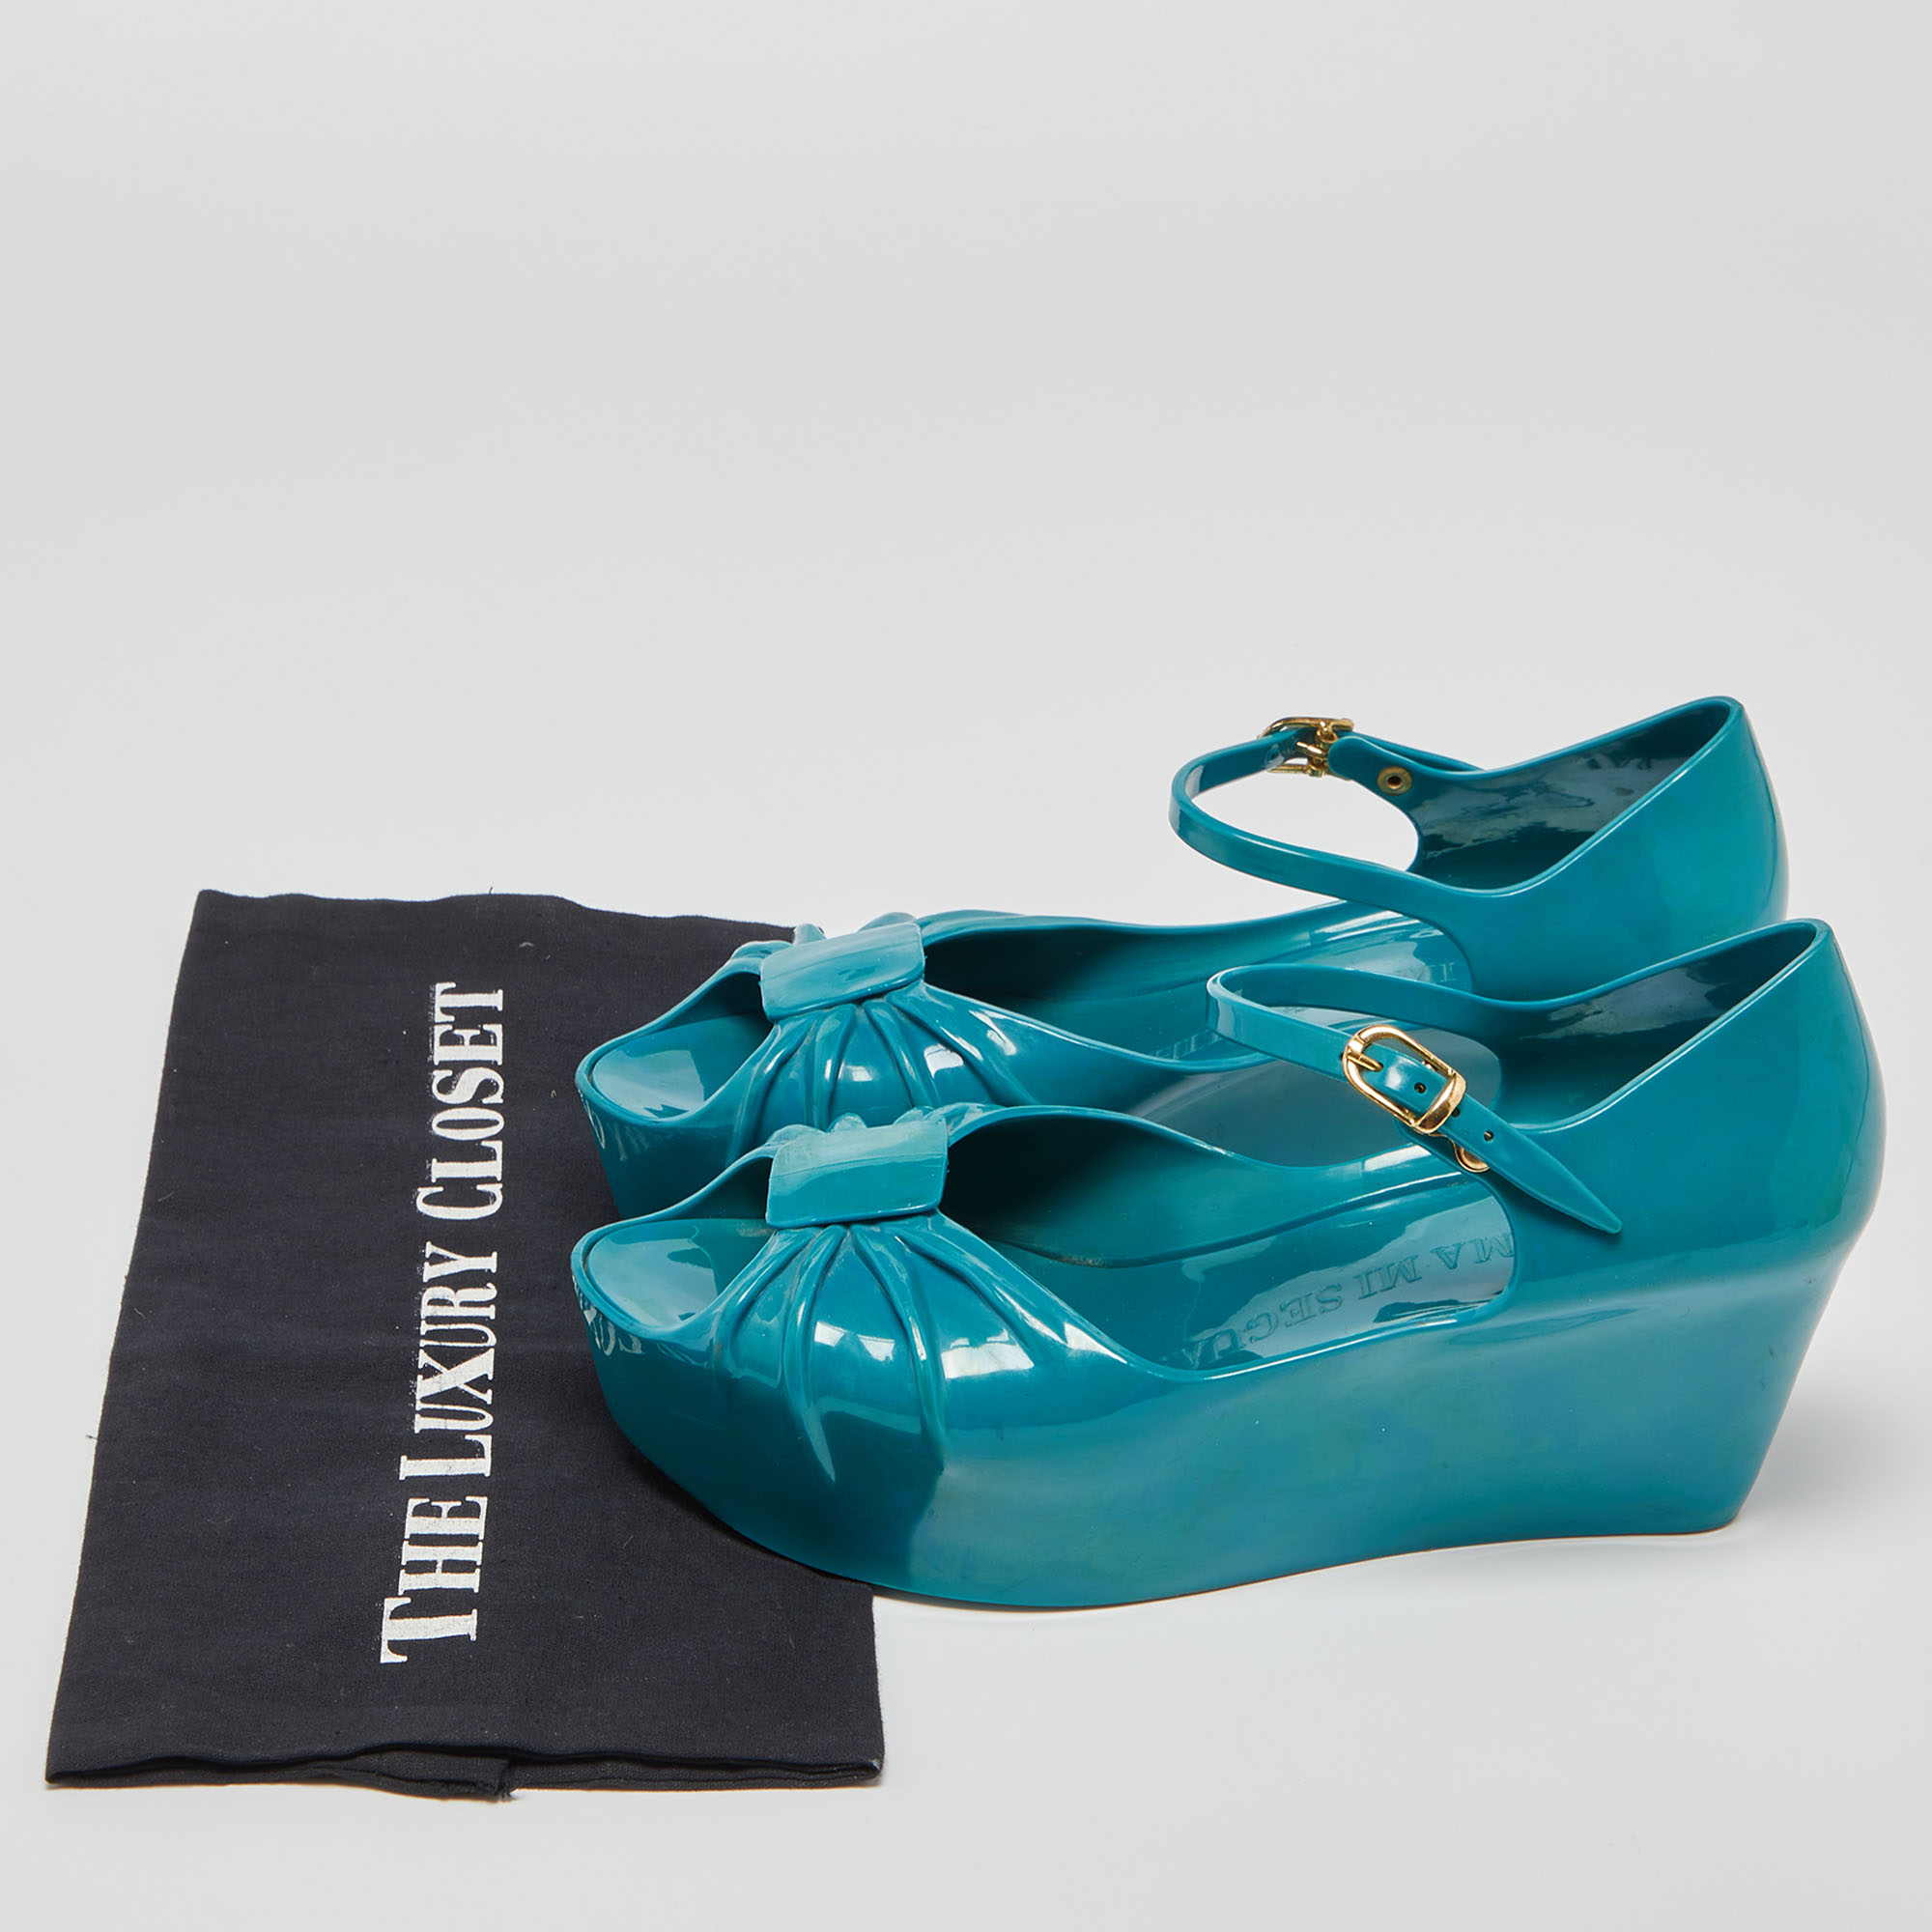 Moschino X Kartell Blue Rubber Jelly Super Bow Wedge Sandals Size 40